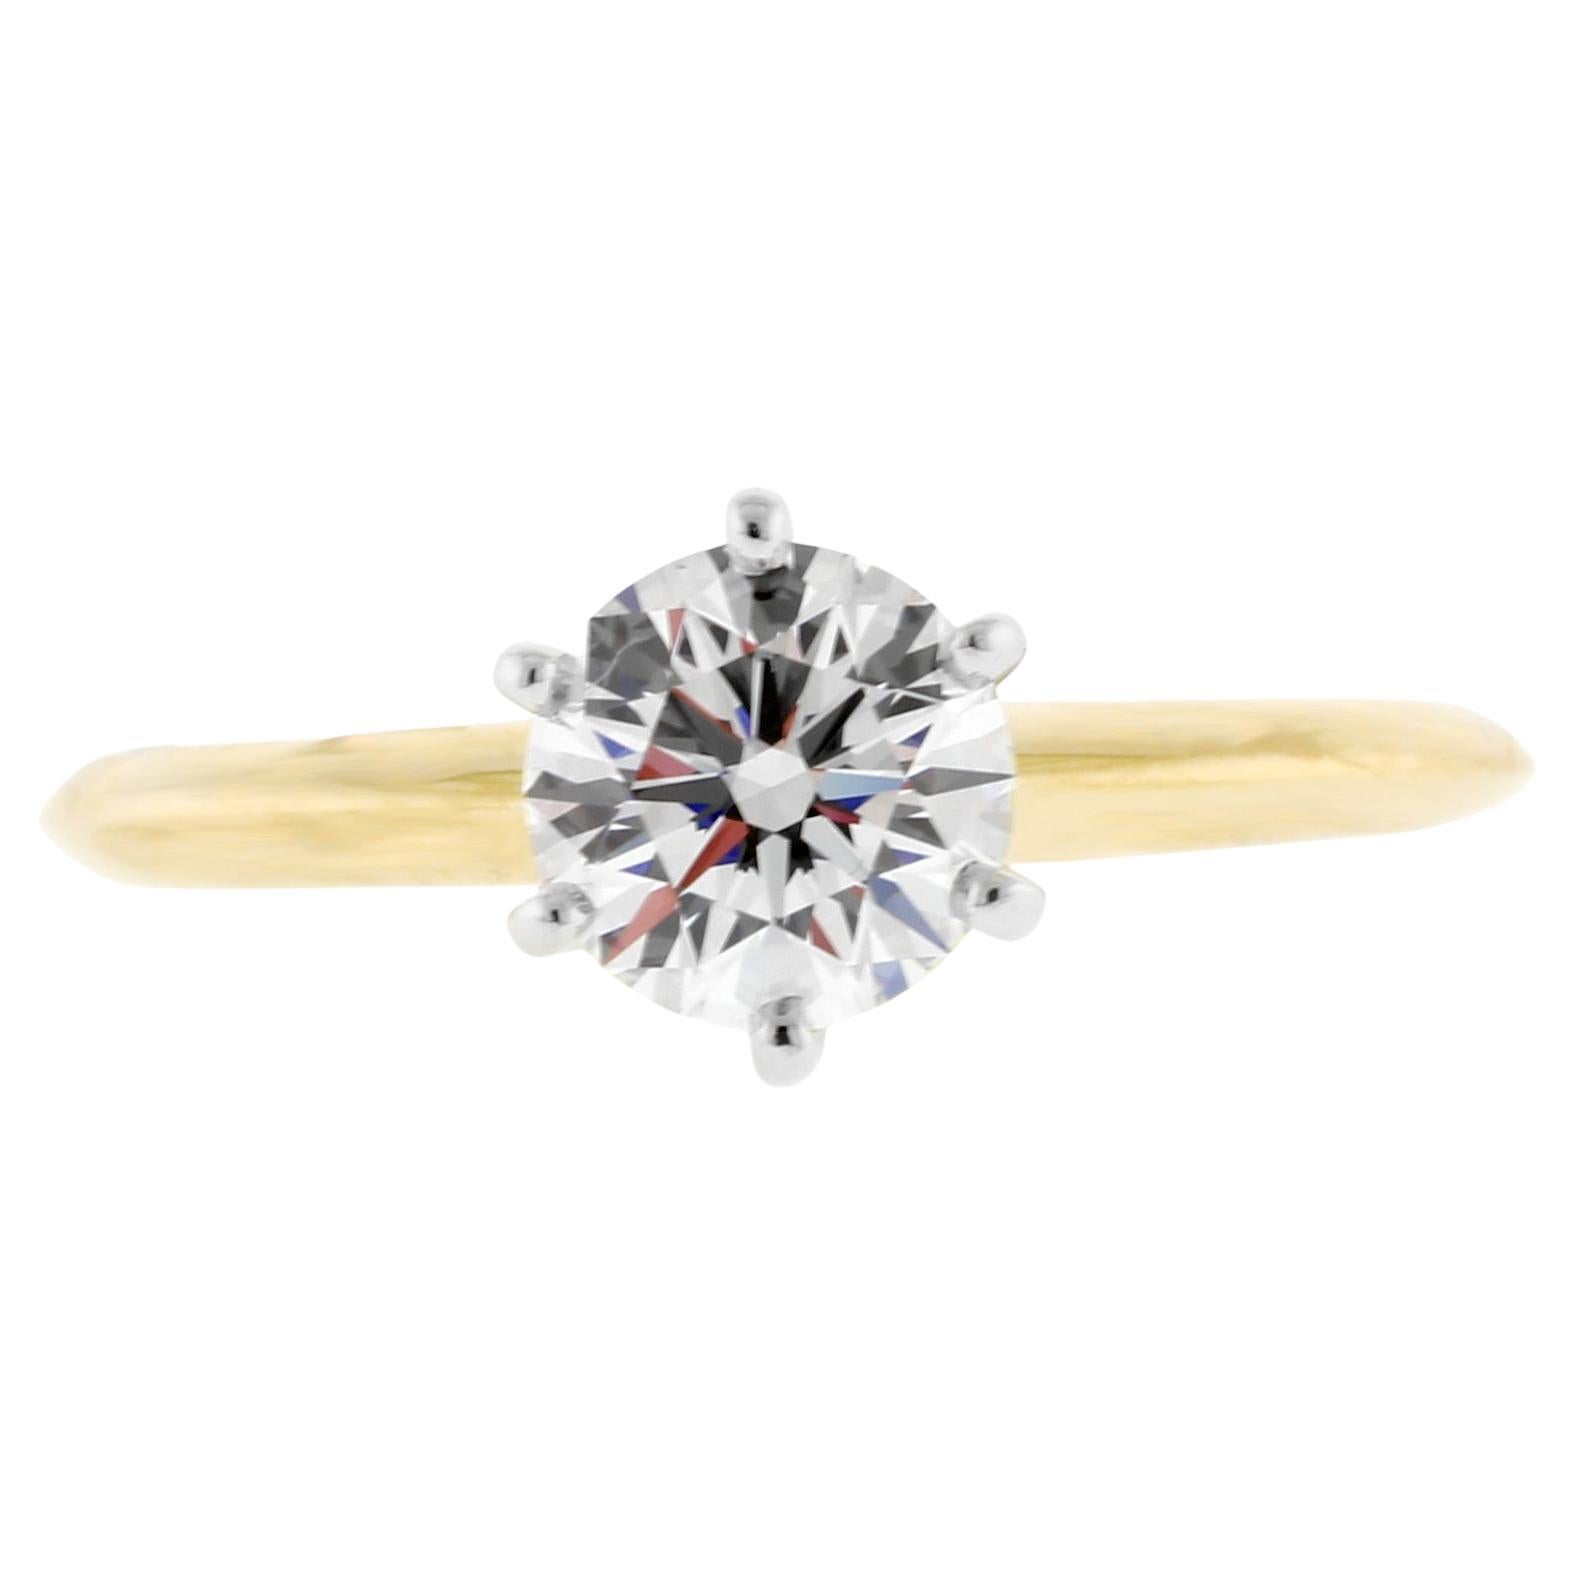 Tiffany & Co. 1 Carat Diamond Solitaire Engagement Ring